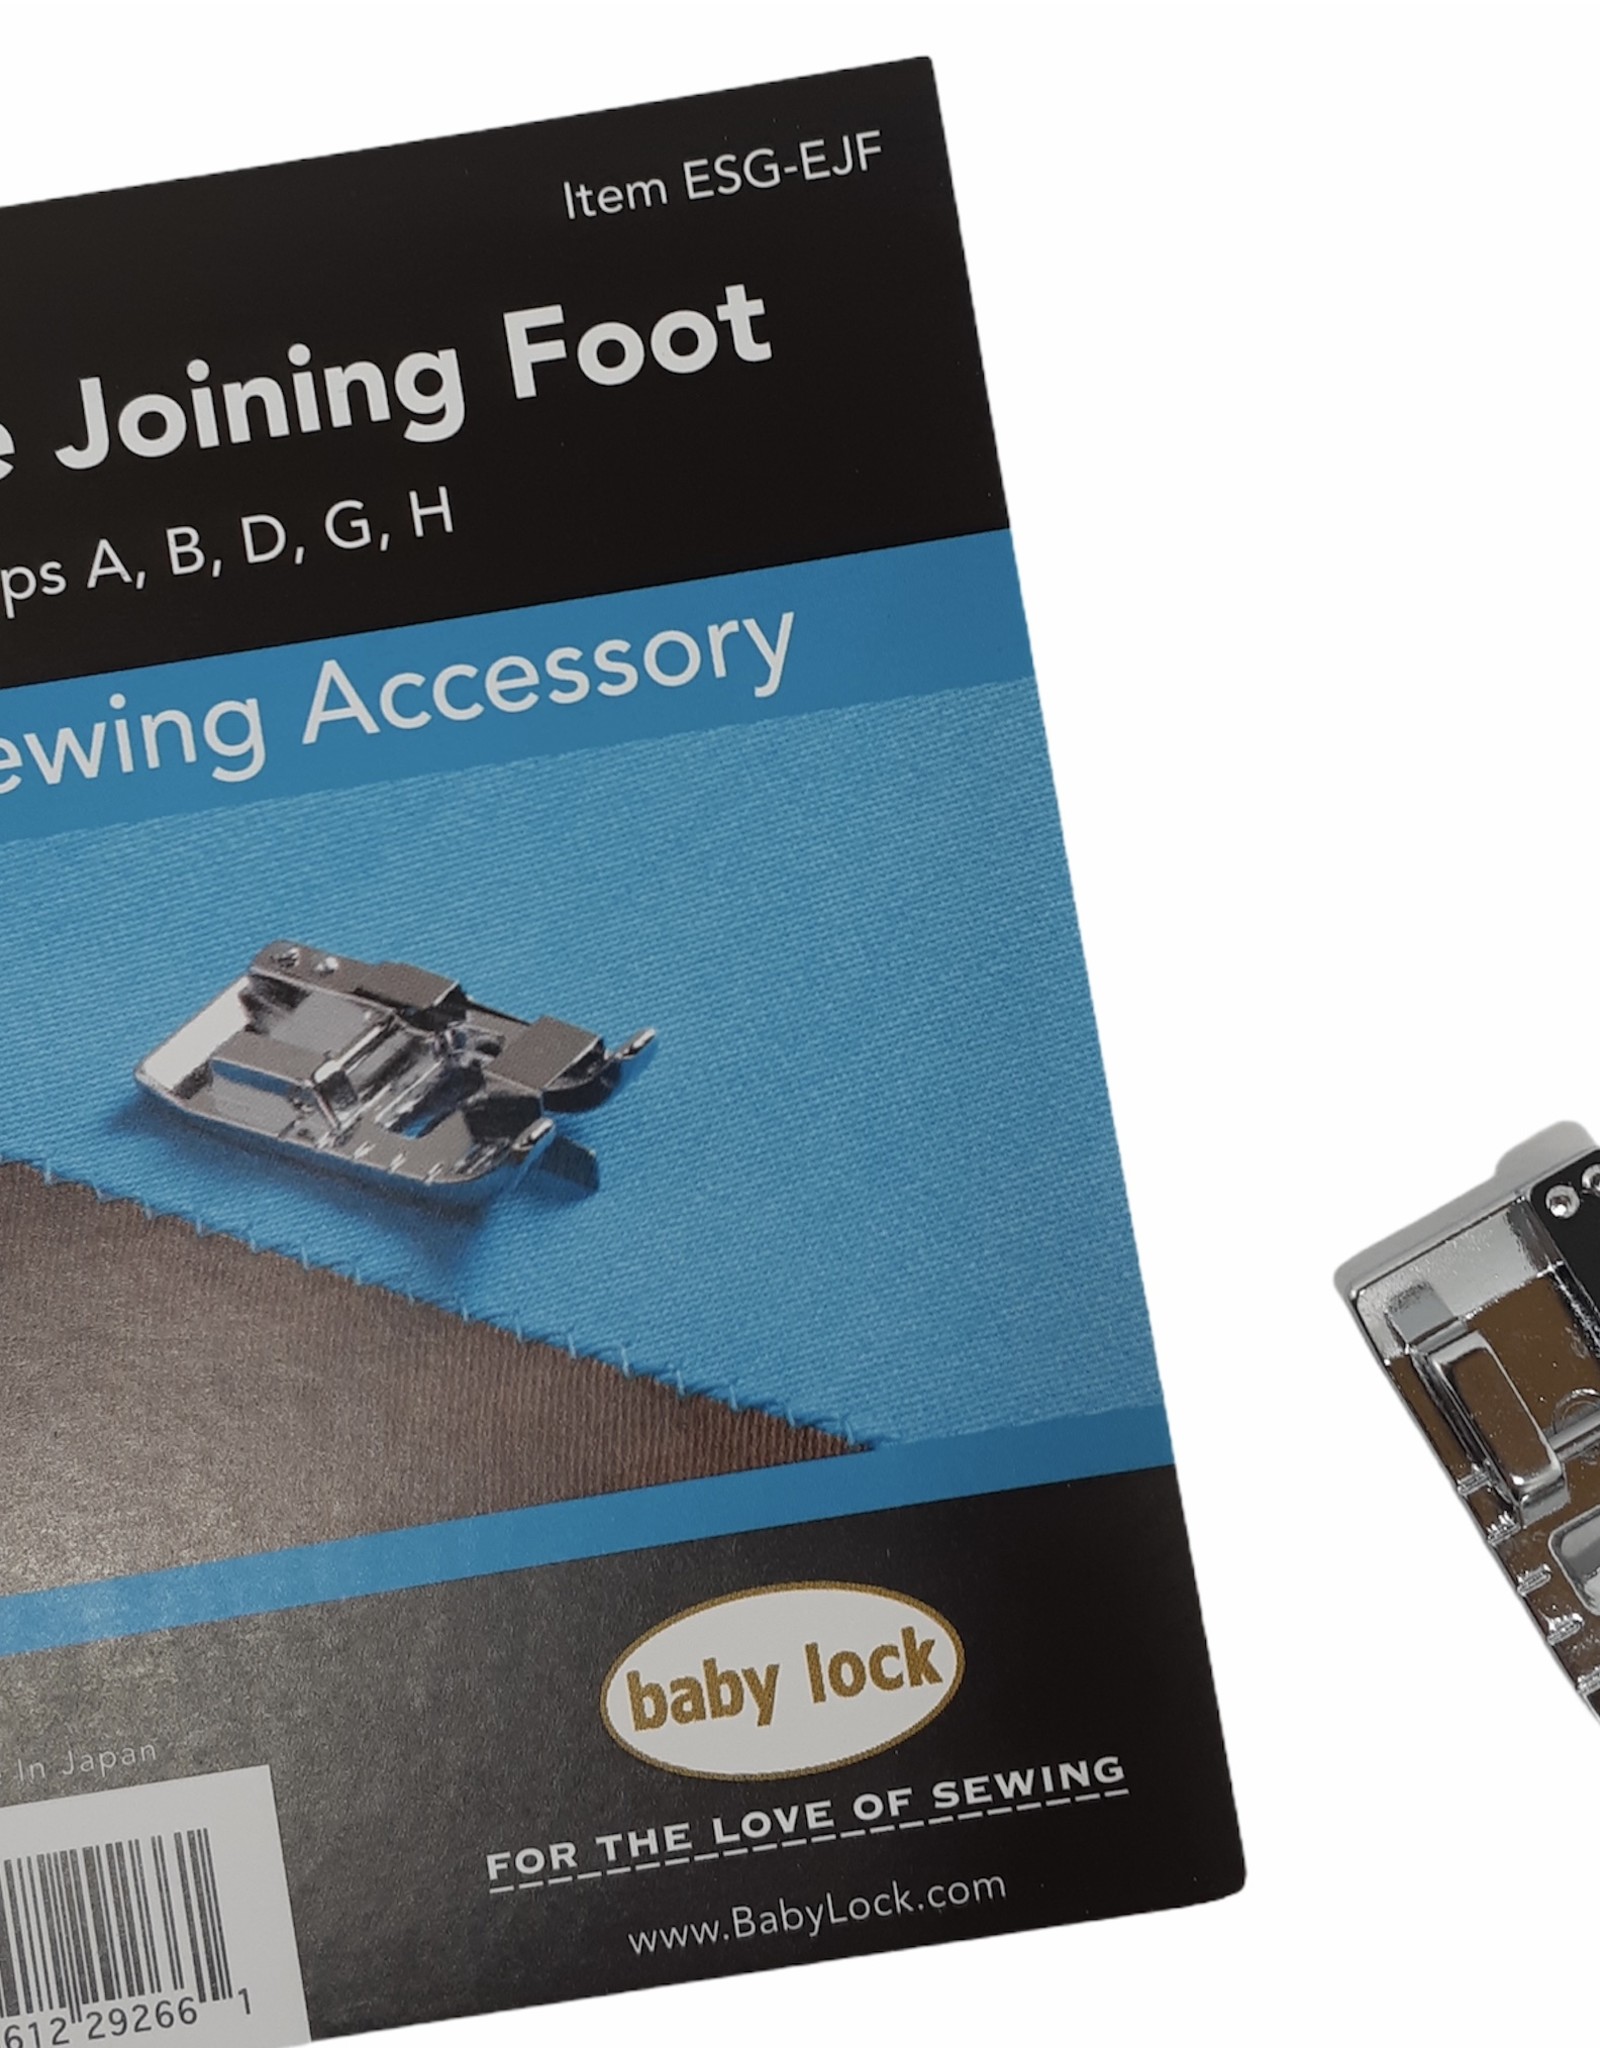 Edge joining foot (baby lock)- ESG-EJF